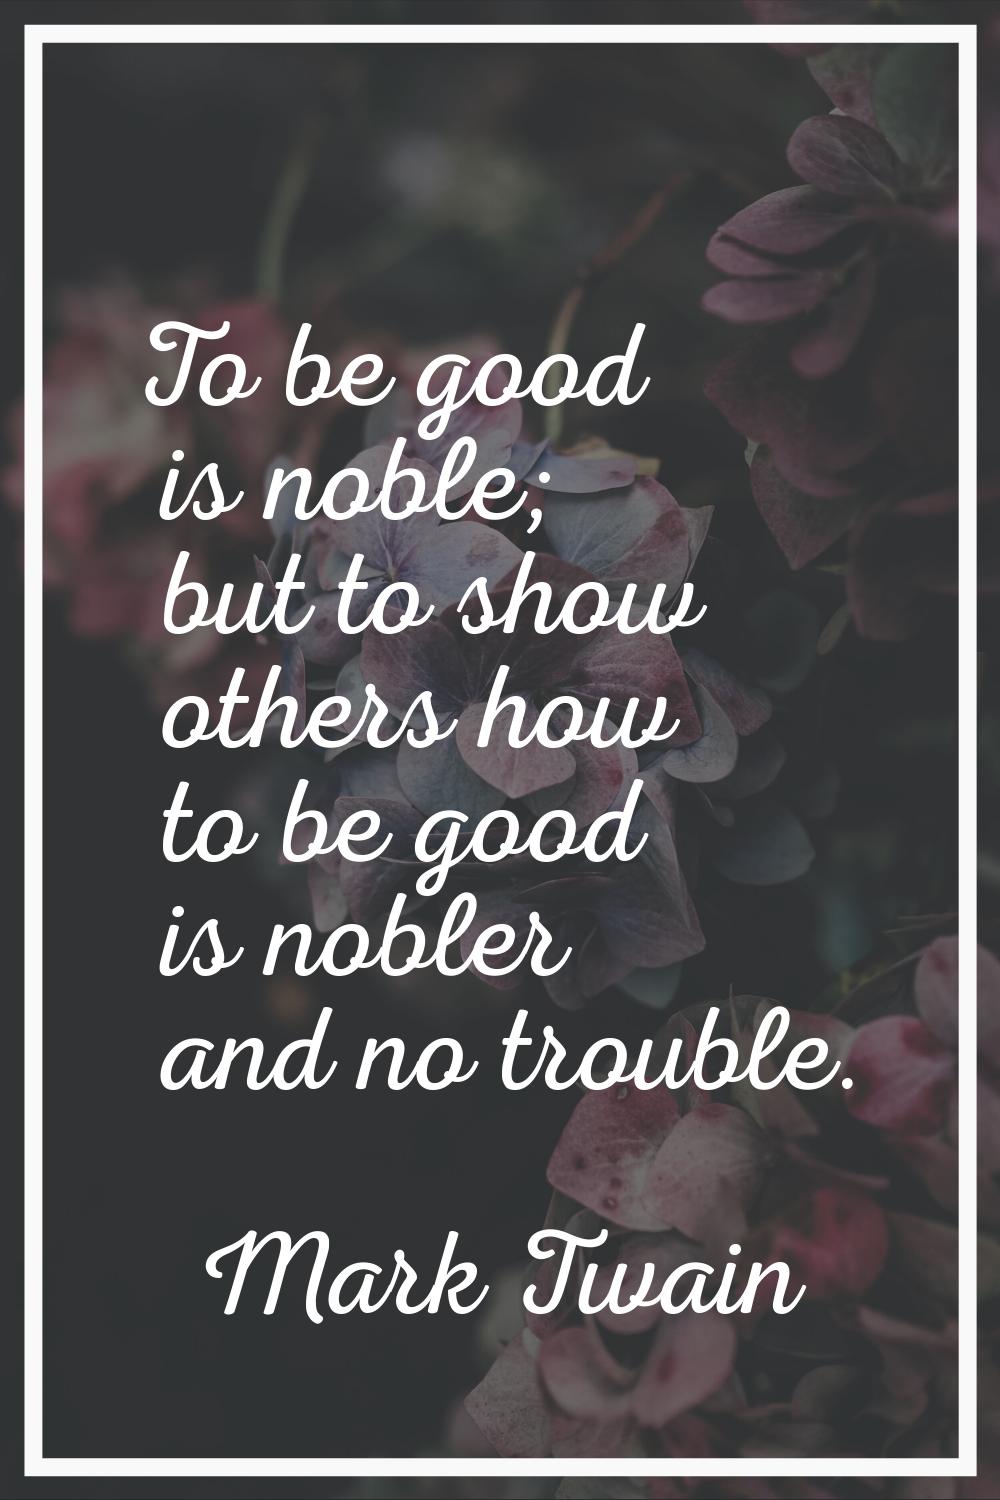 To be good is noble; but to show others how to be good is nobler and no trouble.